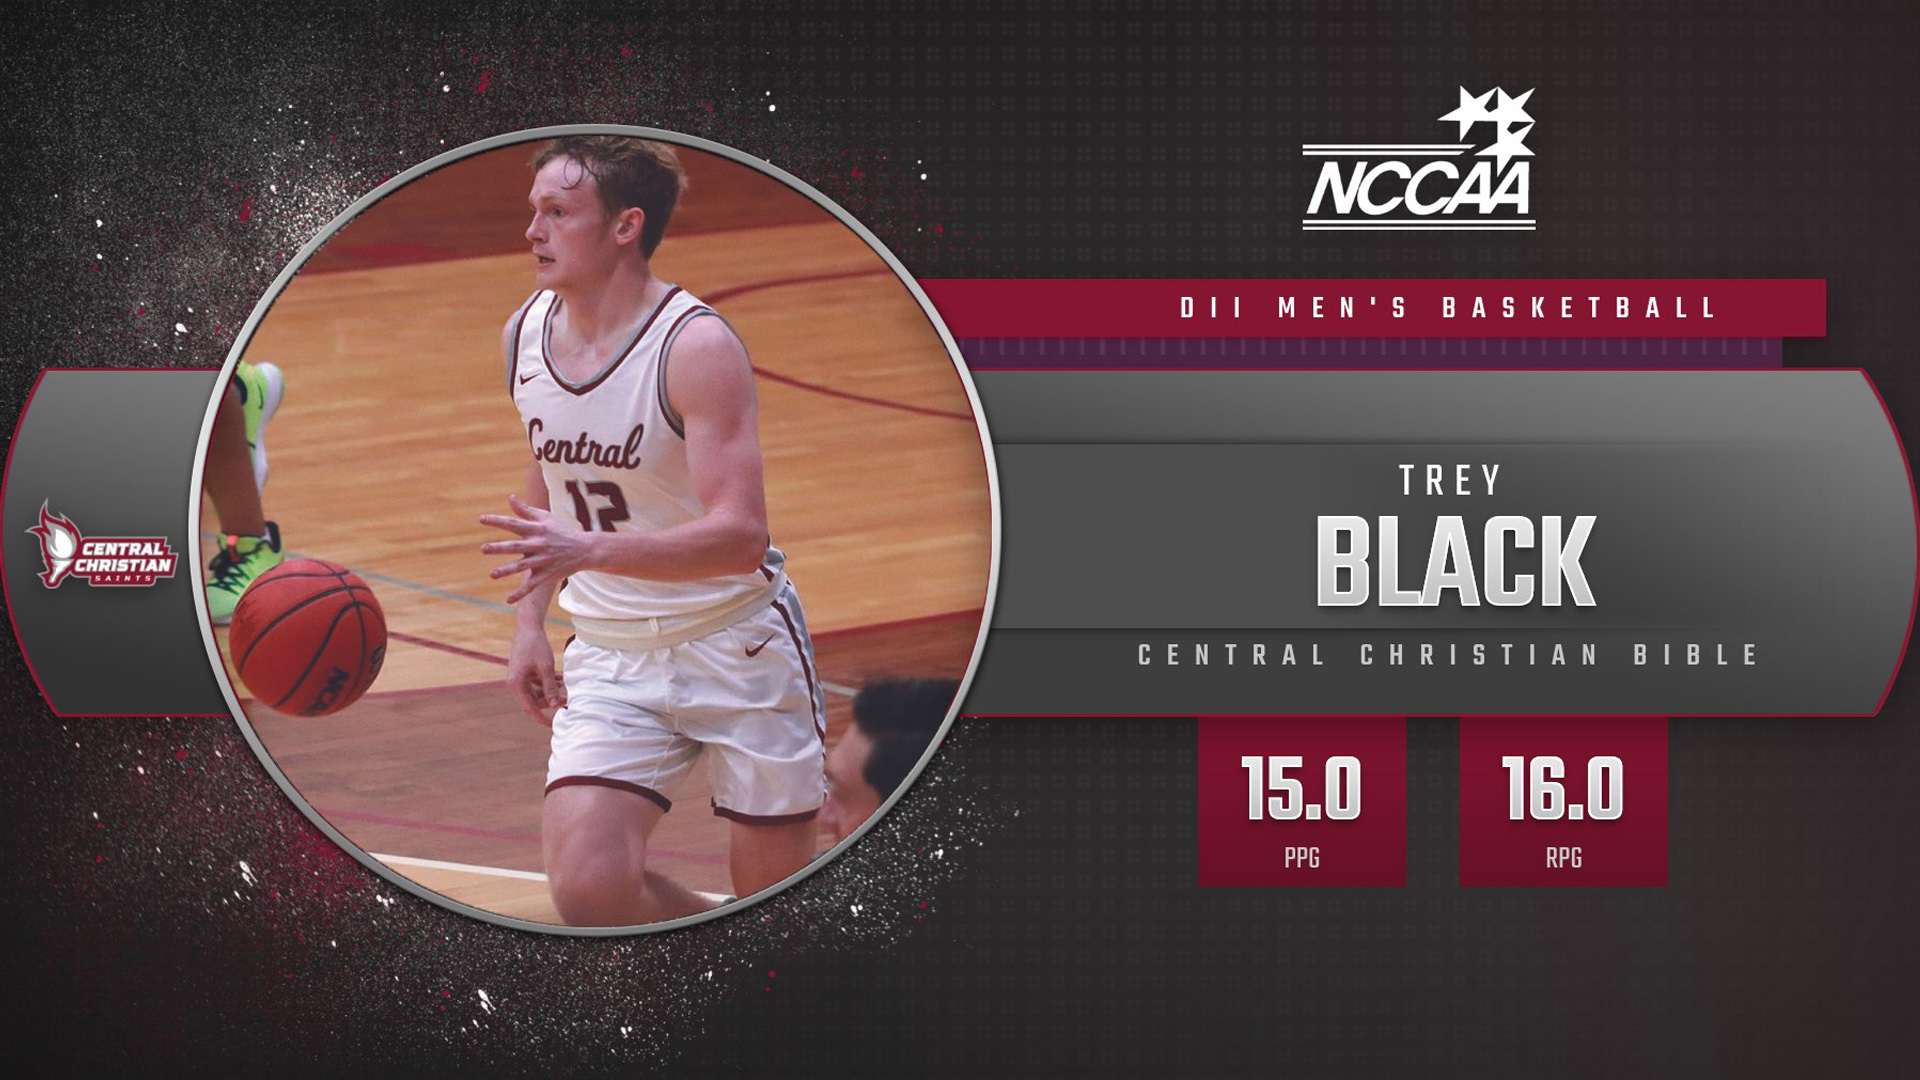 Senior guard Trey Black was named NCCAA Men's Basketball Division II Student-Athlete of the Week on Monday, Nov. 15.